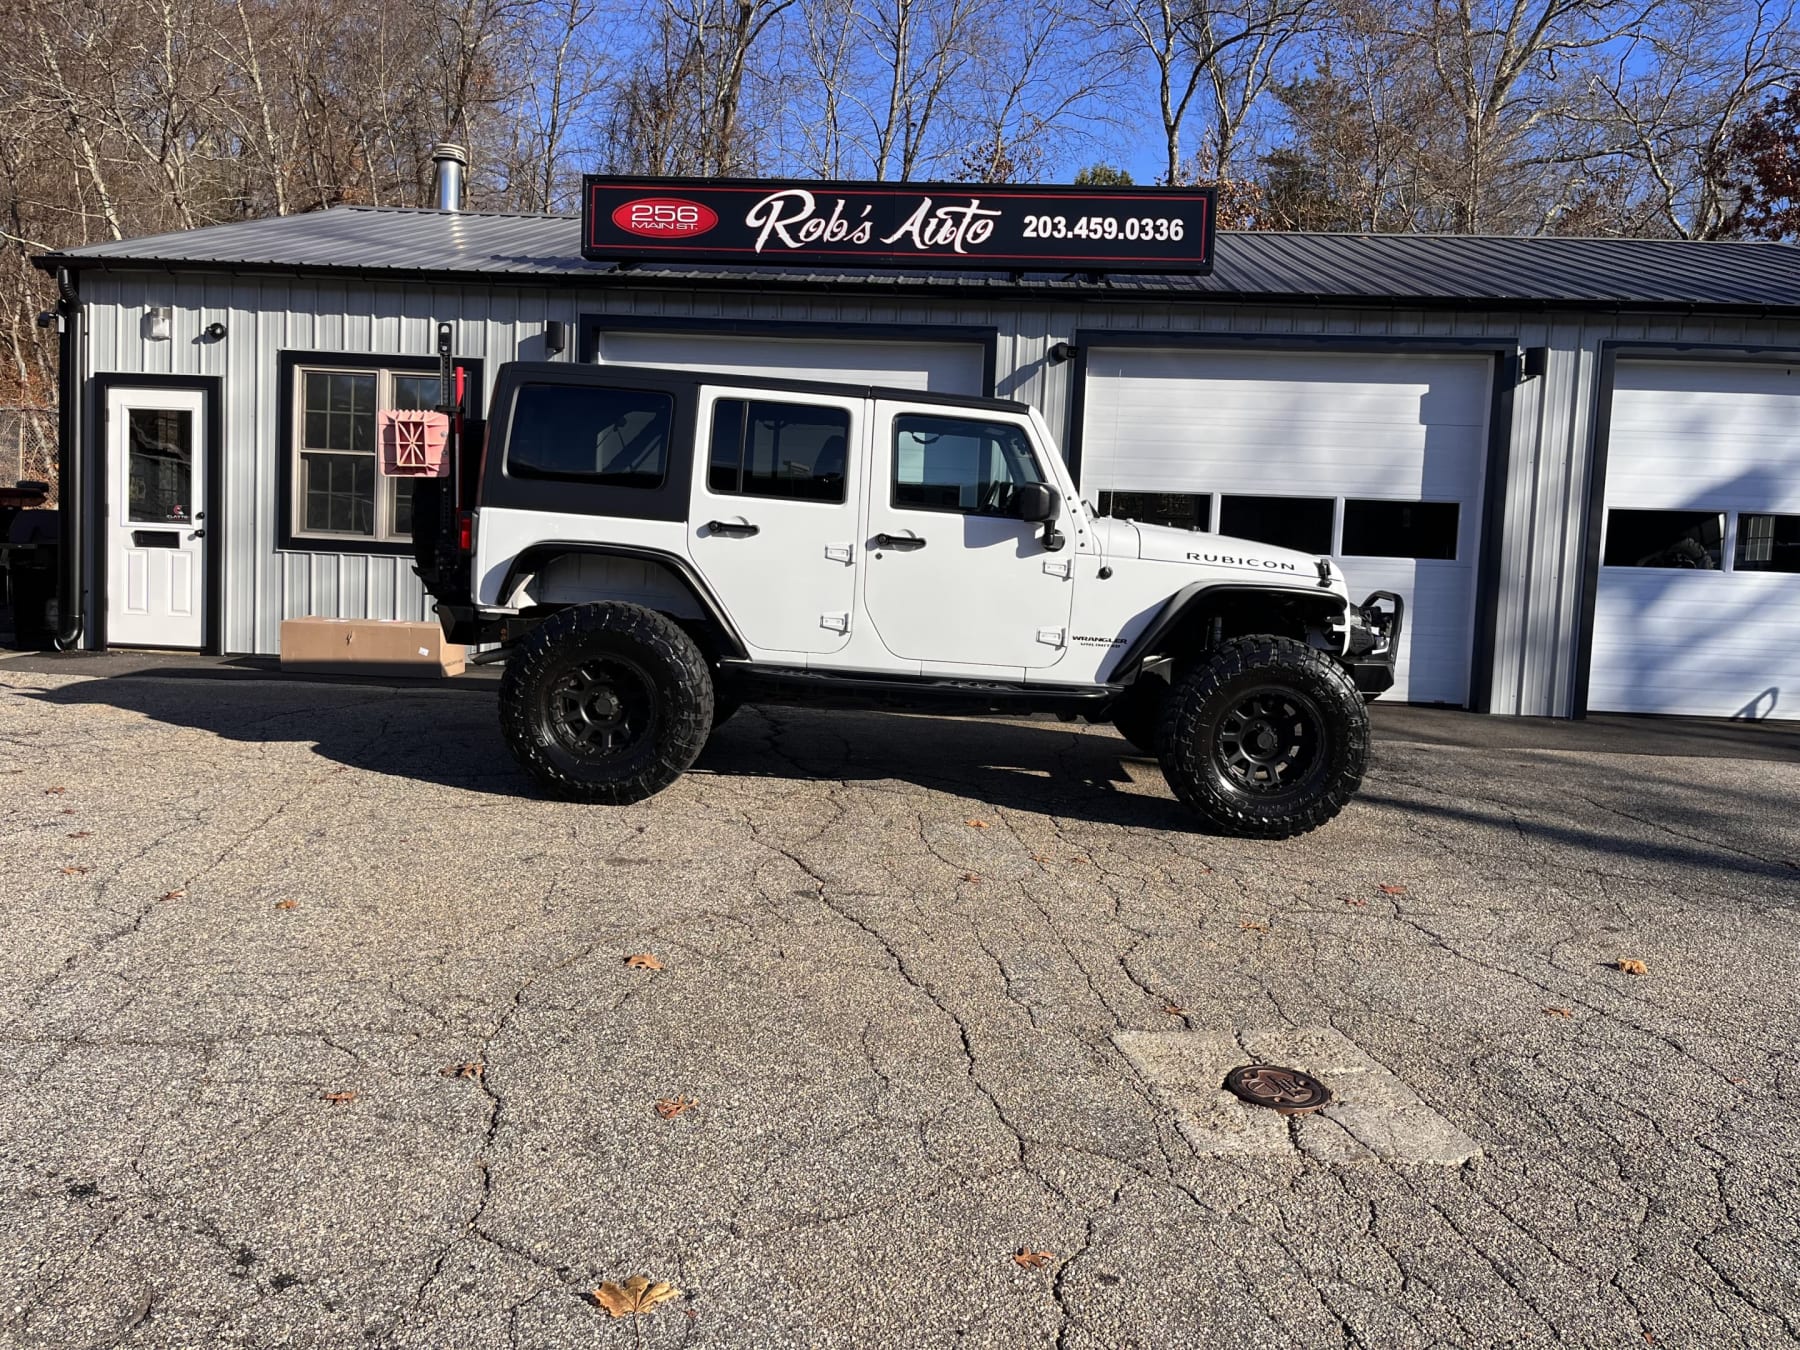 New Arrival!! 2017 Jeep Wrangler Unlimited Rubicon!! One Owner! Clean Carfax!! ONLY 18k MILES!! Heated Leather Seats, Remote Start, Alpine Premium 9-Speakers with All Weather Subwoofer!! Thousands of dollars in upgrades!! Won’t last at only $35,900!